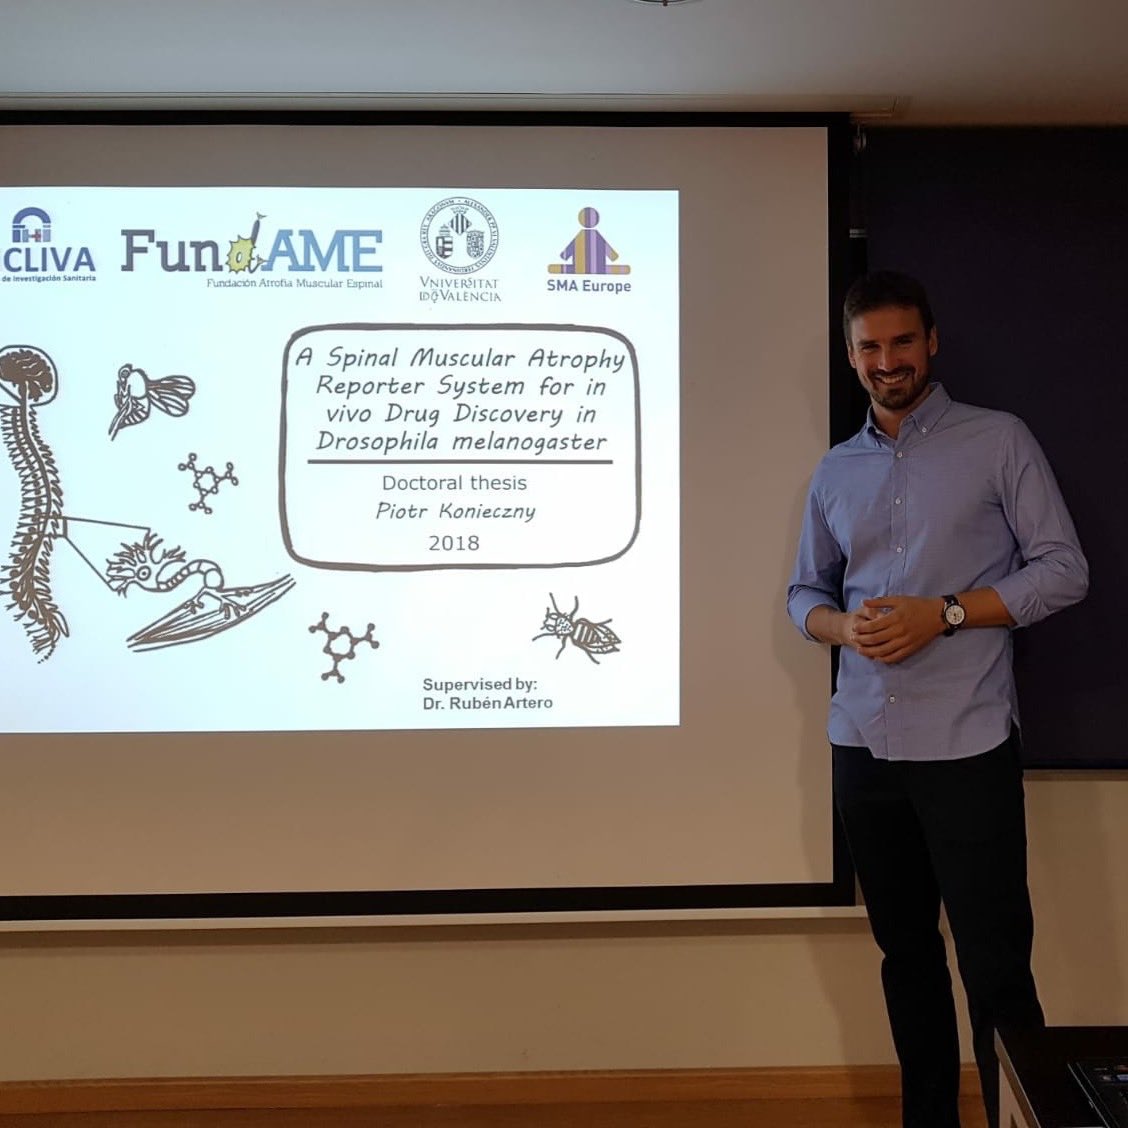 Congratulations Dr. Piotr Konieczny after a successful defense of his doctoral thesis titled 'A Spinal Muscular Atrophy Reporter System for in vivo Drug Discovery in Drosophila melanogaster'
#spinalmuscularatrophy #drosophila #drugdiscovery #universidaddevalencia #genomics